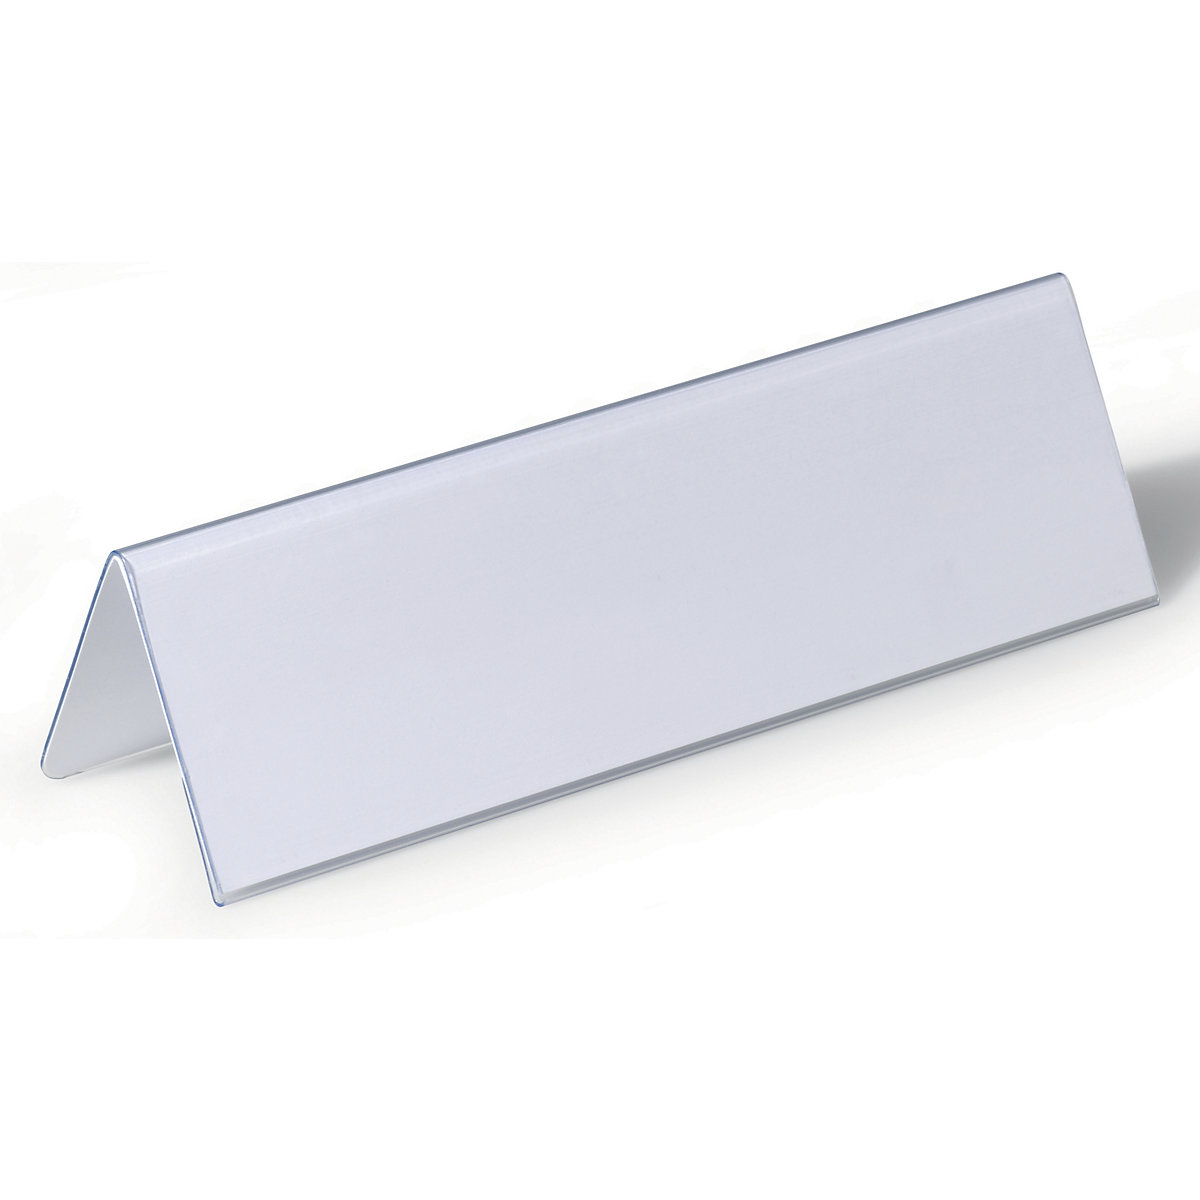 Table place name holder made of hard foil – DURABLE